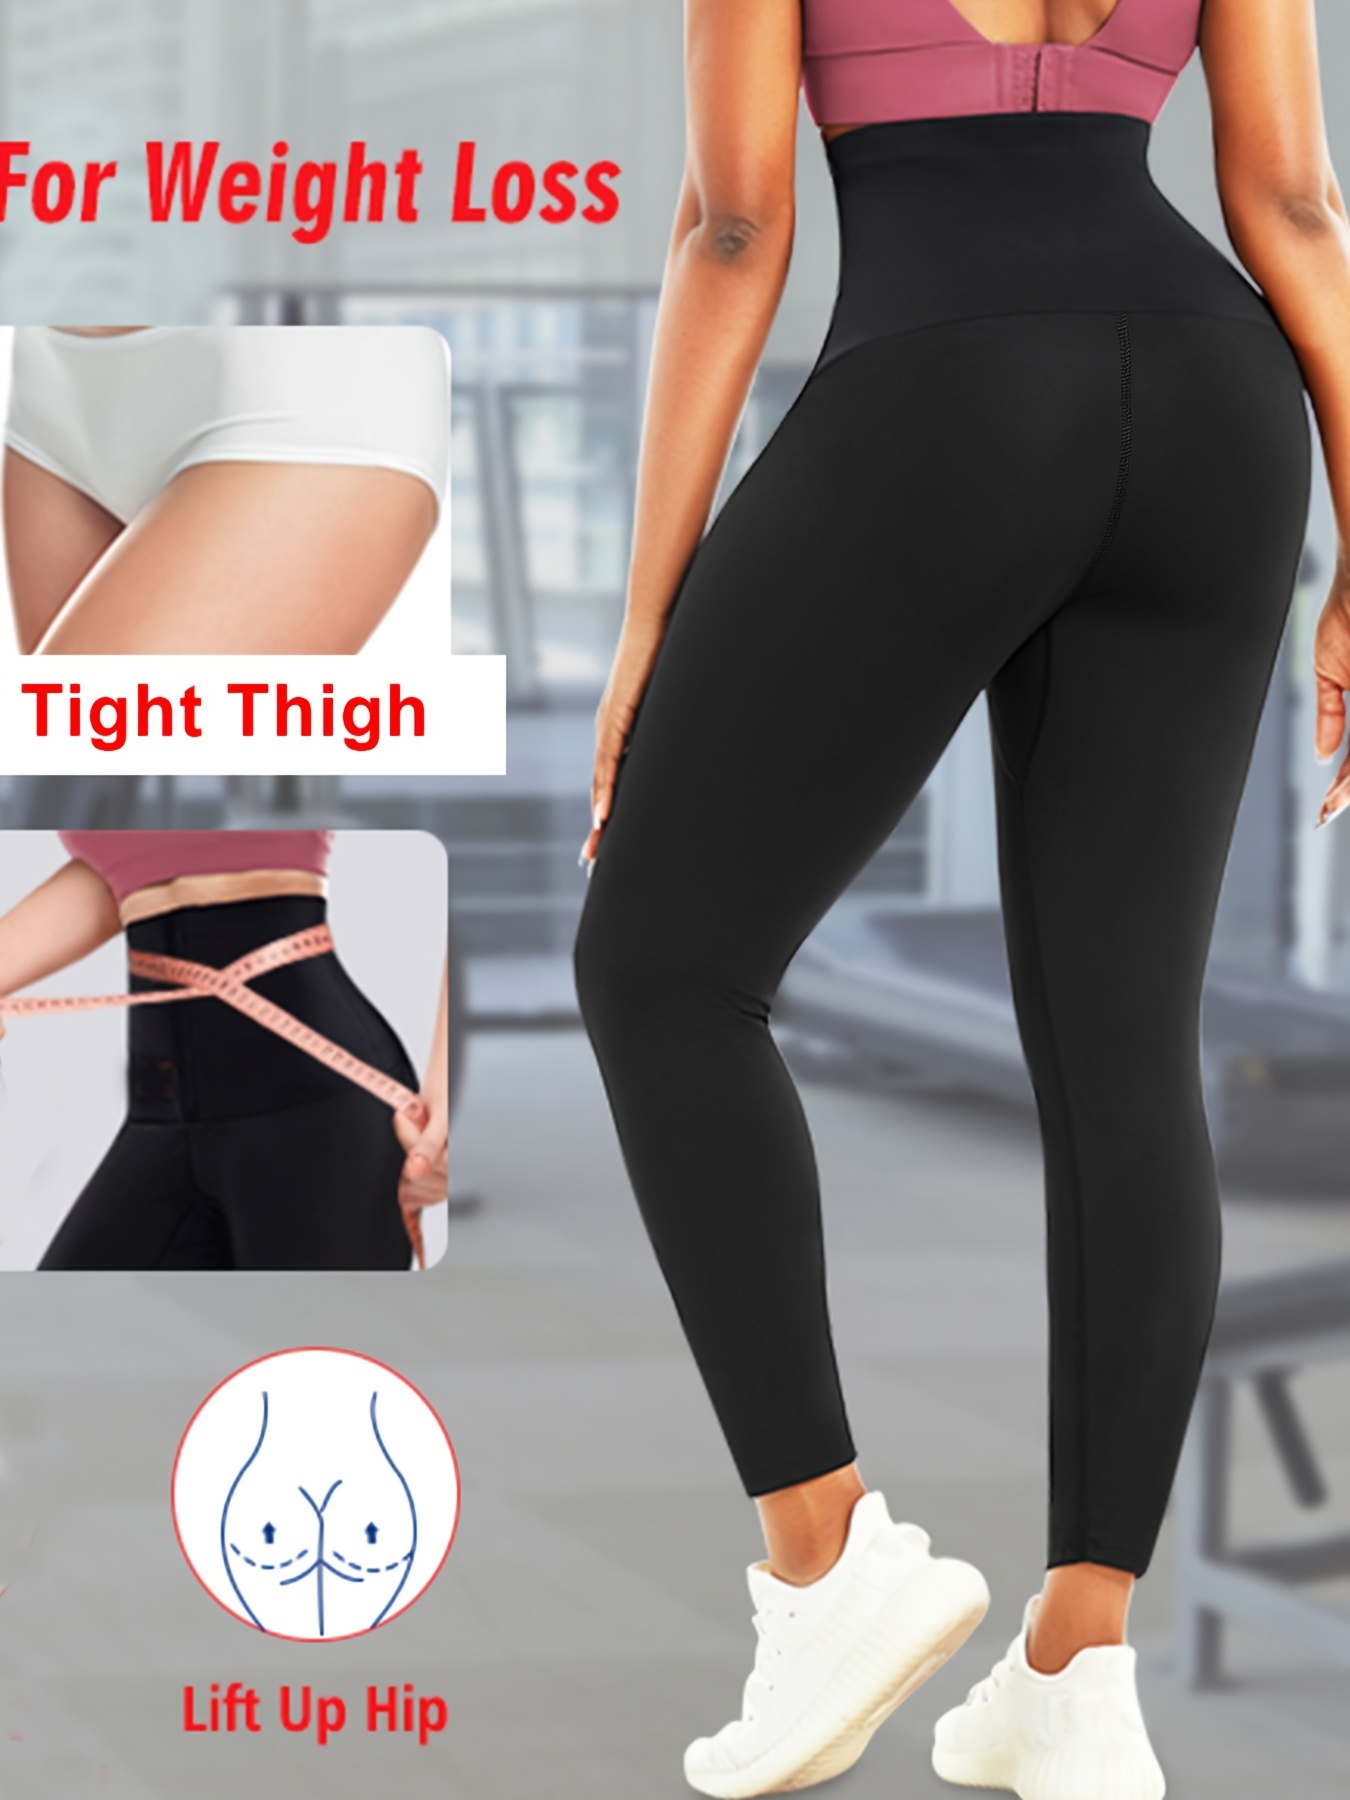 Waist Trainer Sauna Leggings Compression Pants for Weight Loss with Pockets